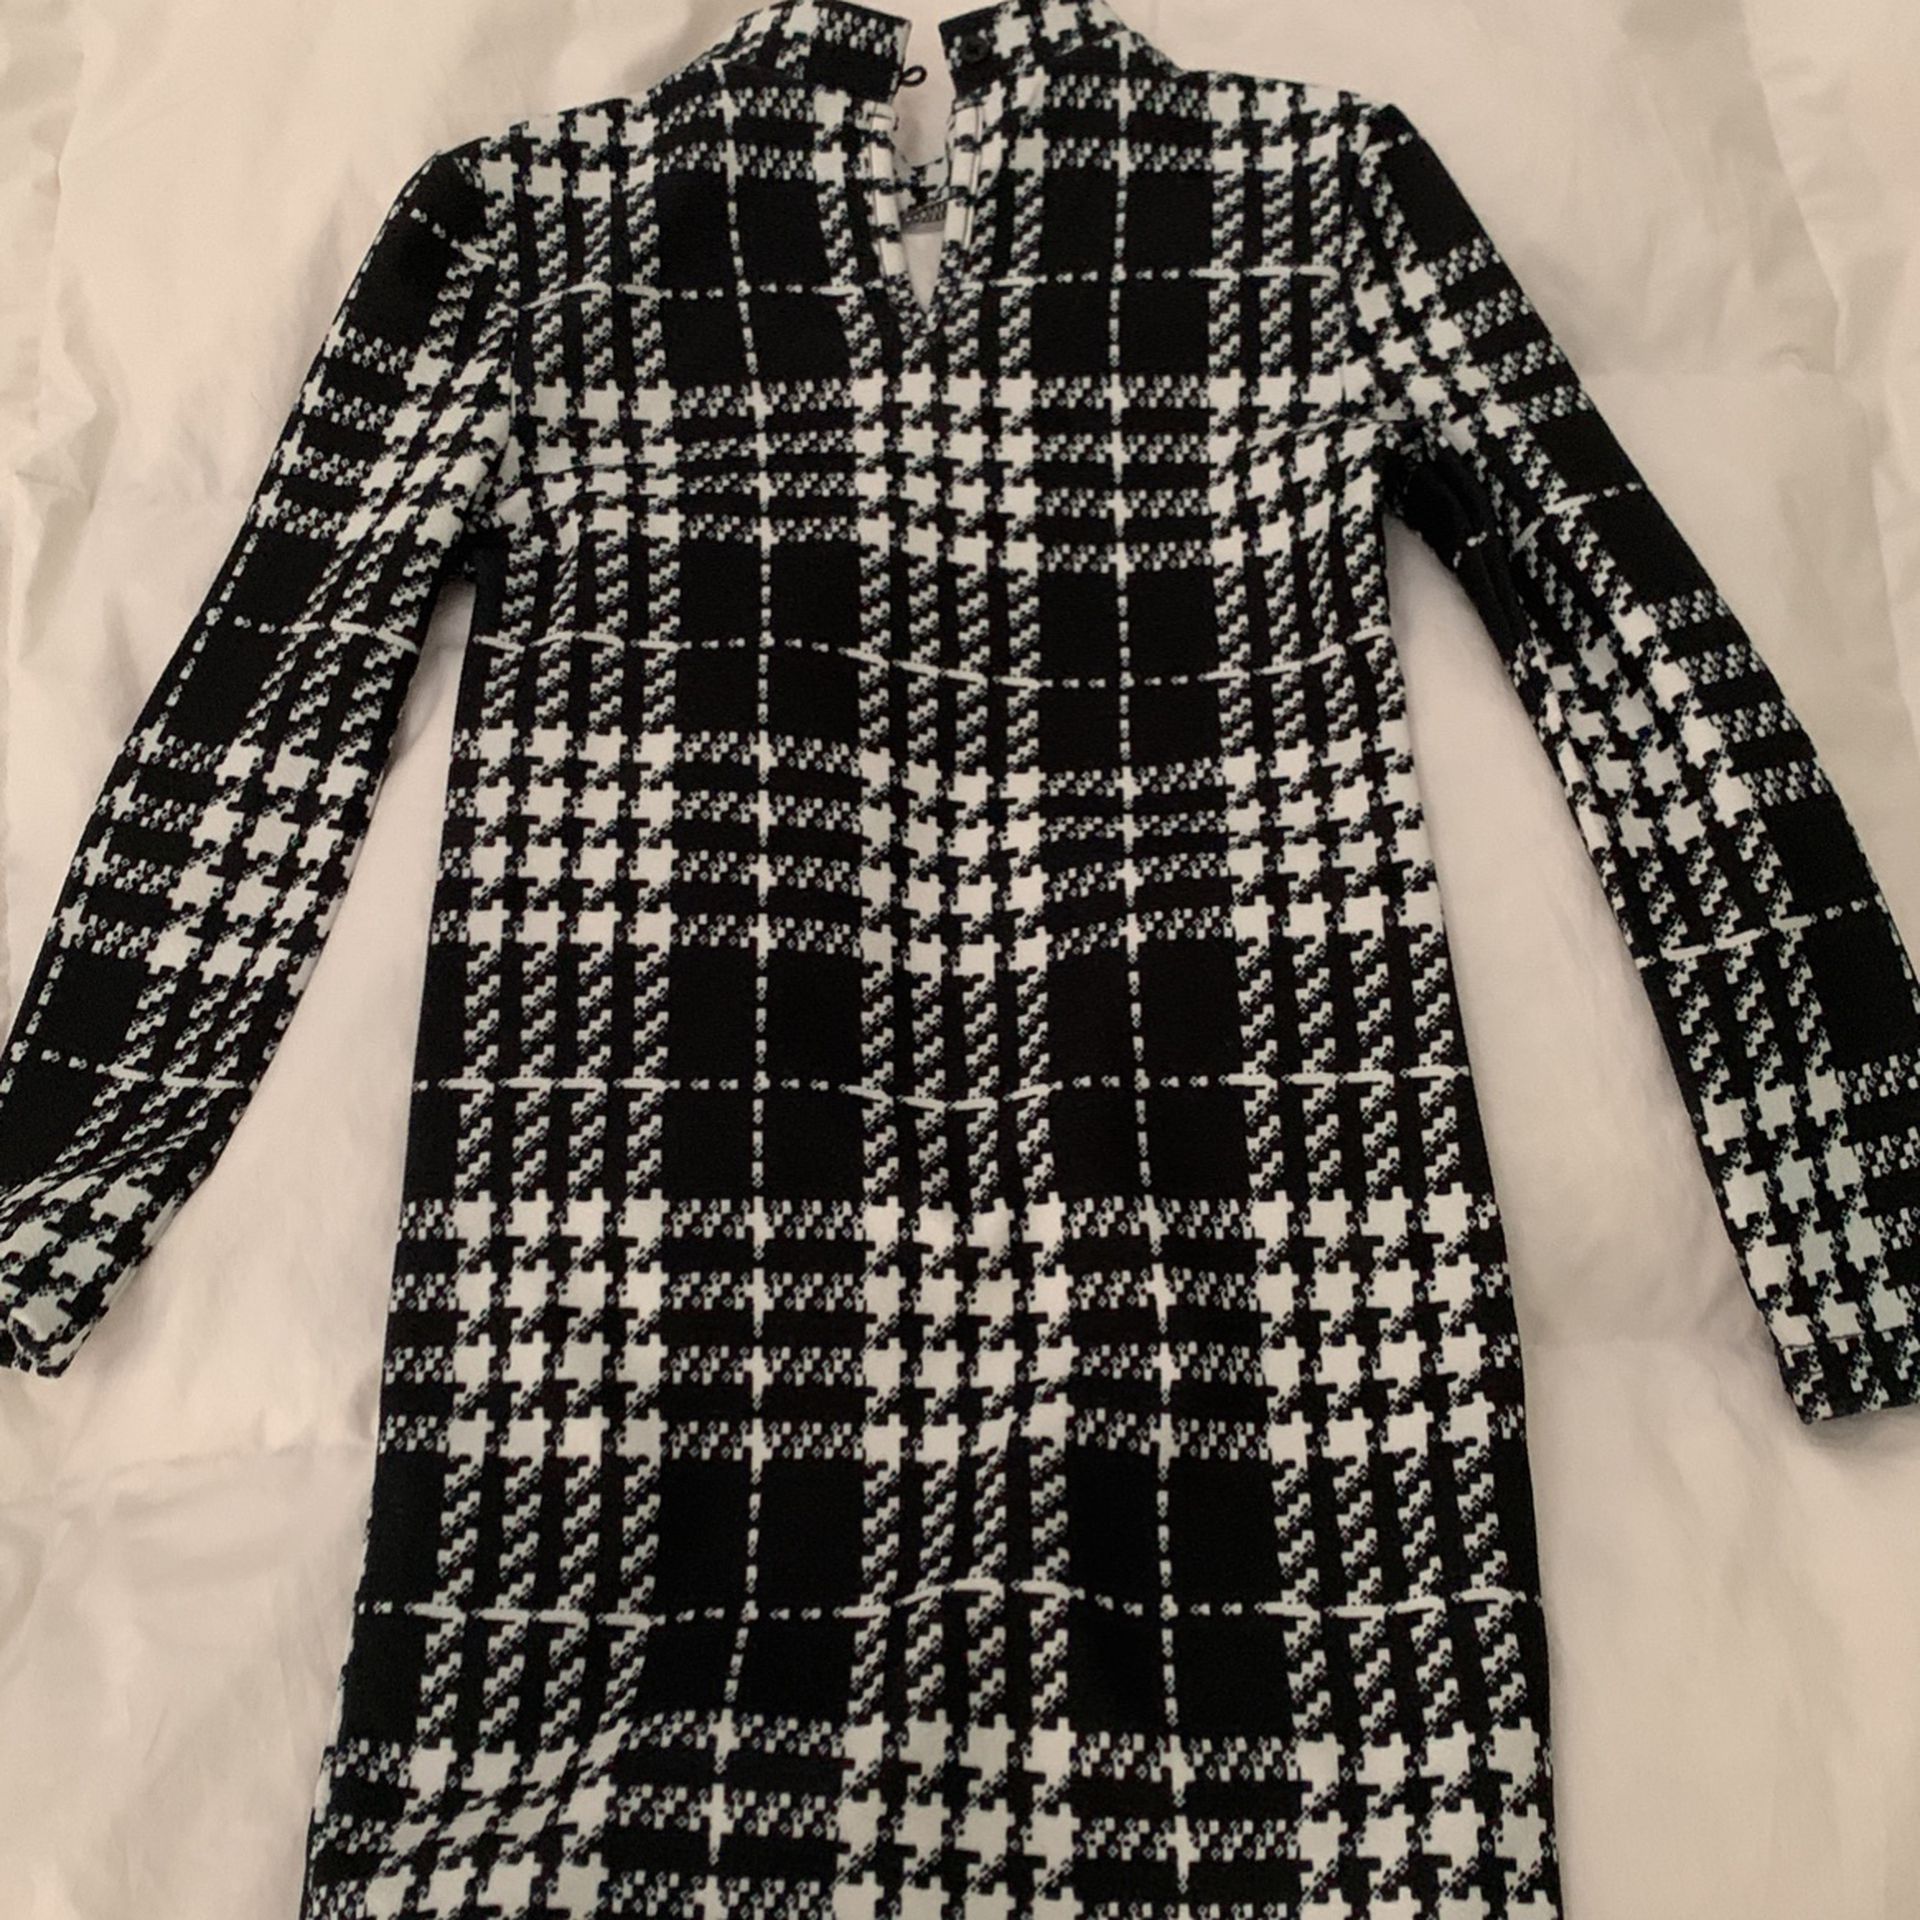 Black And White Girl Dress Size 5